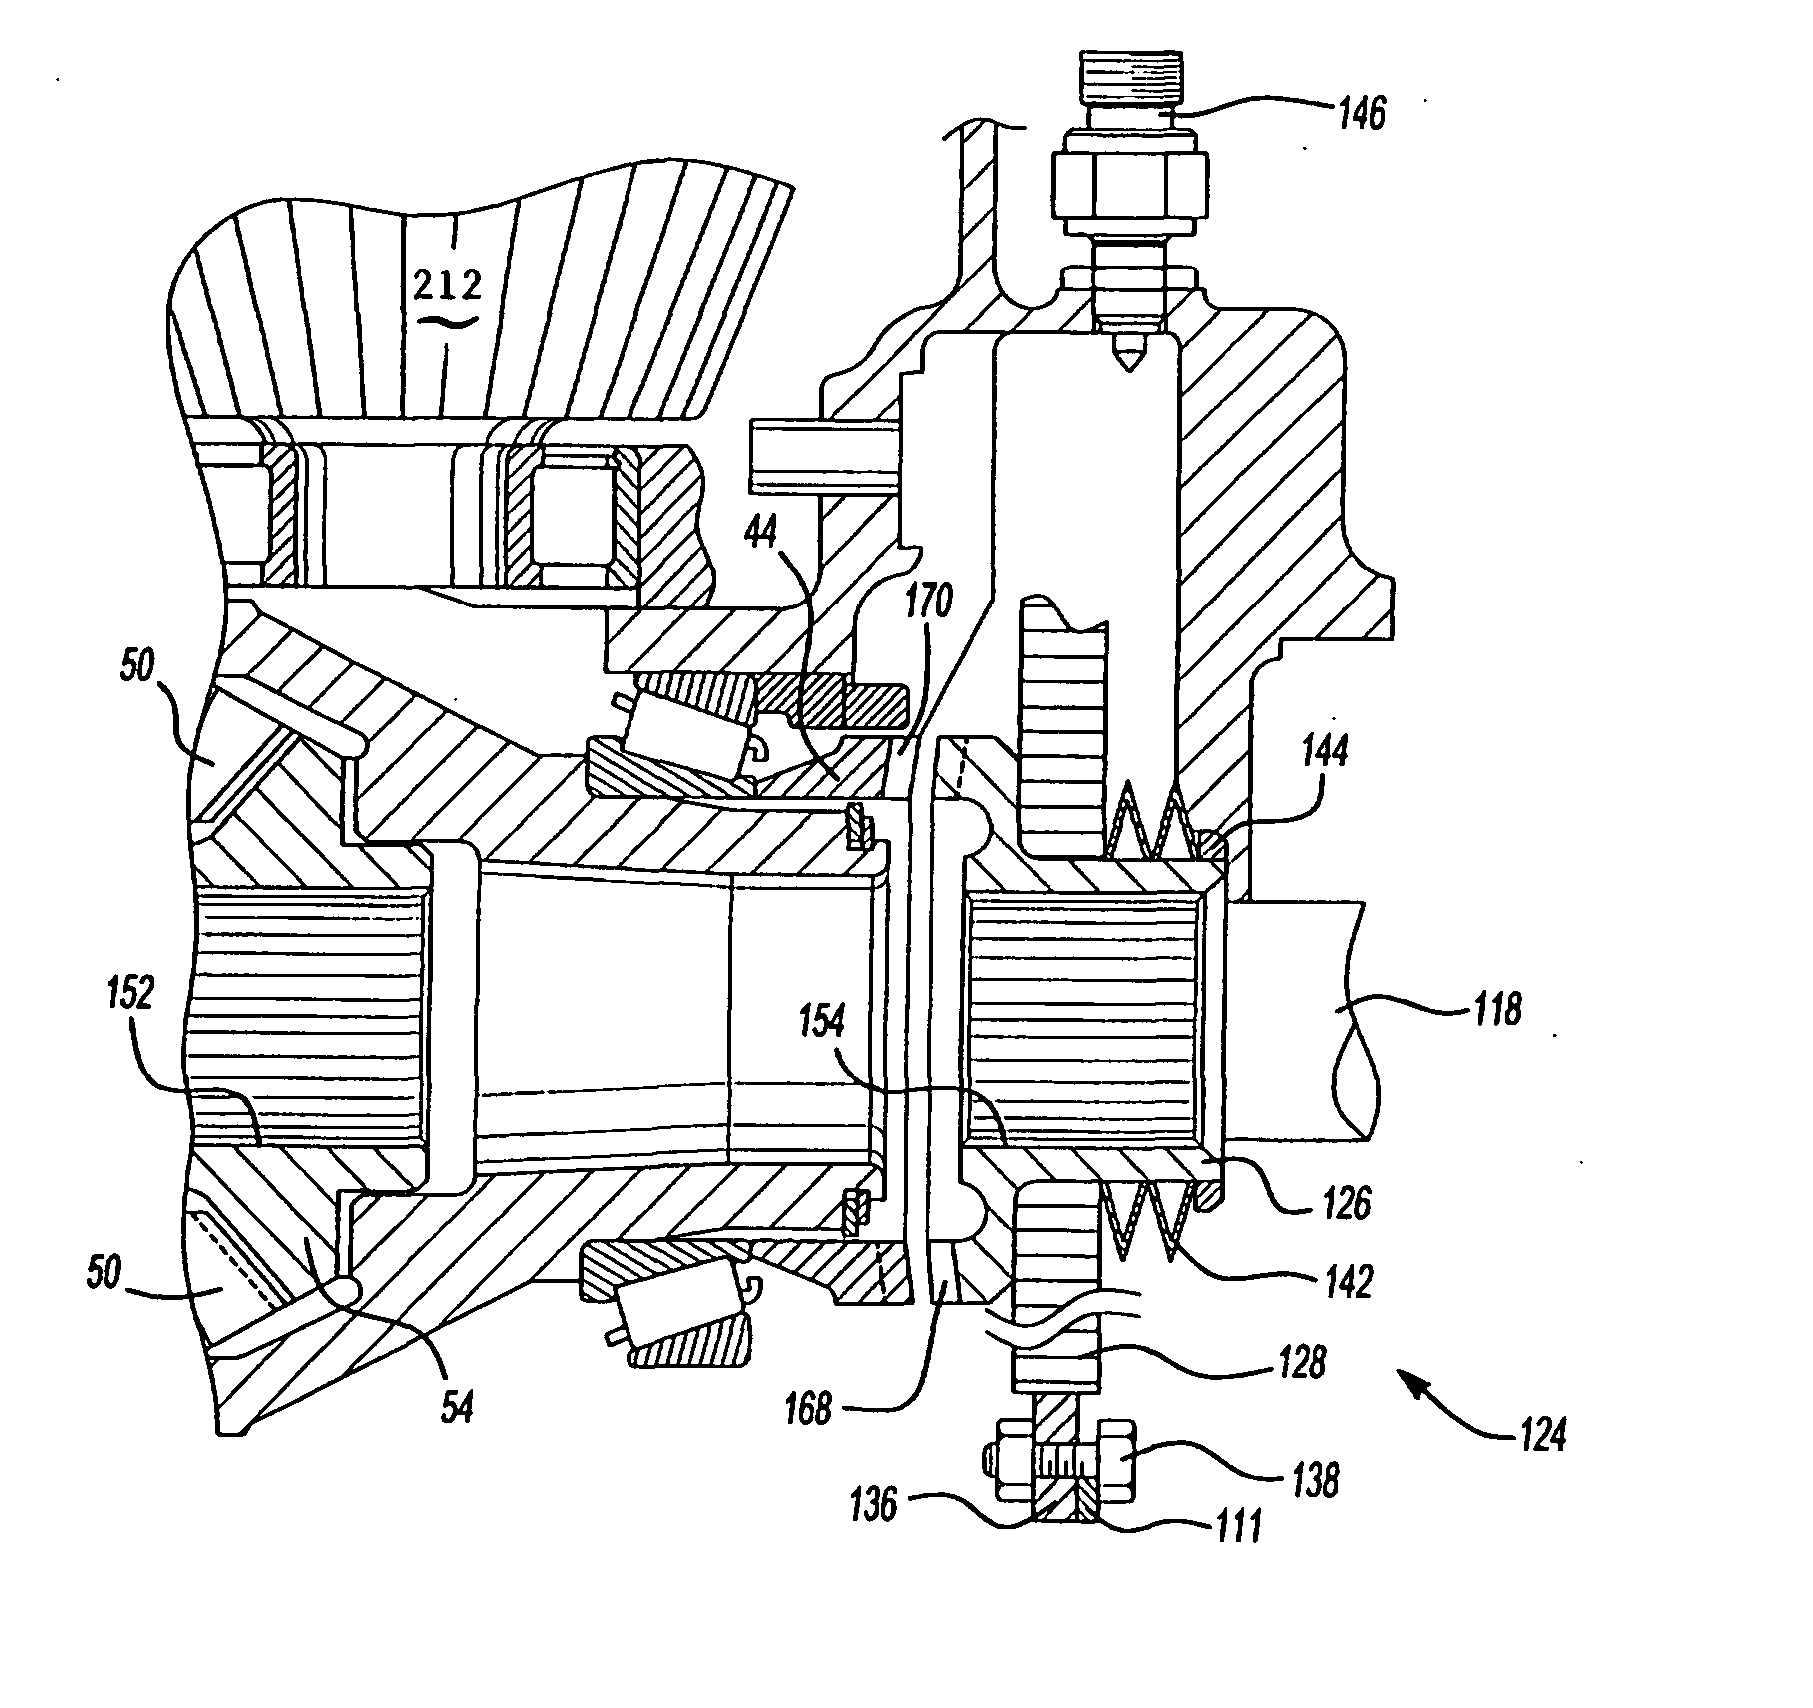 Electronic differential lock assembly